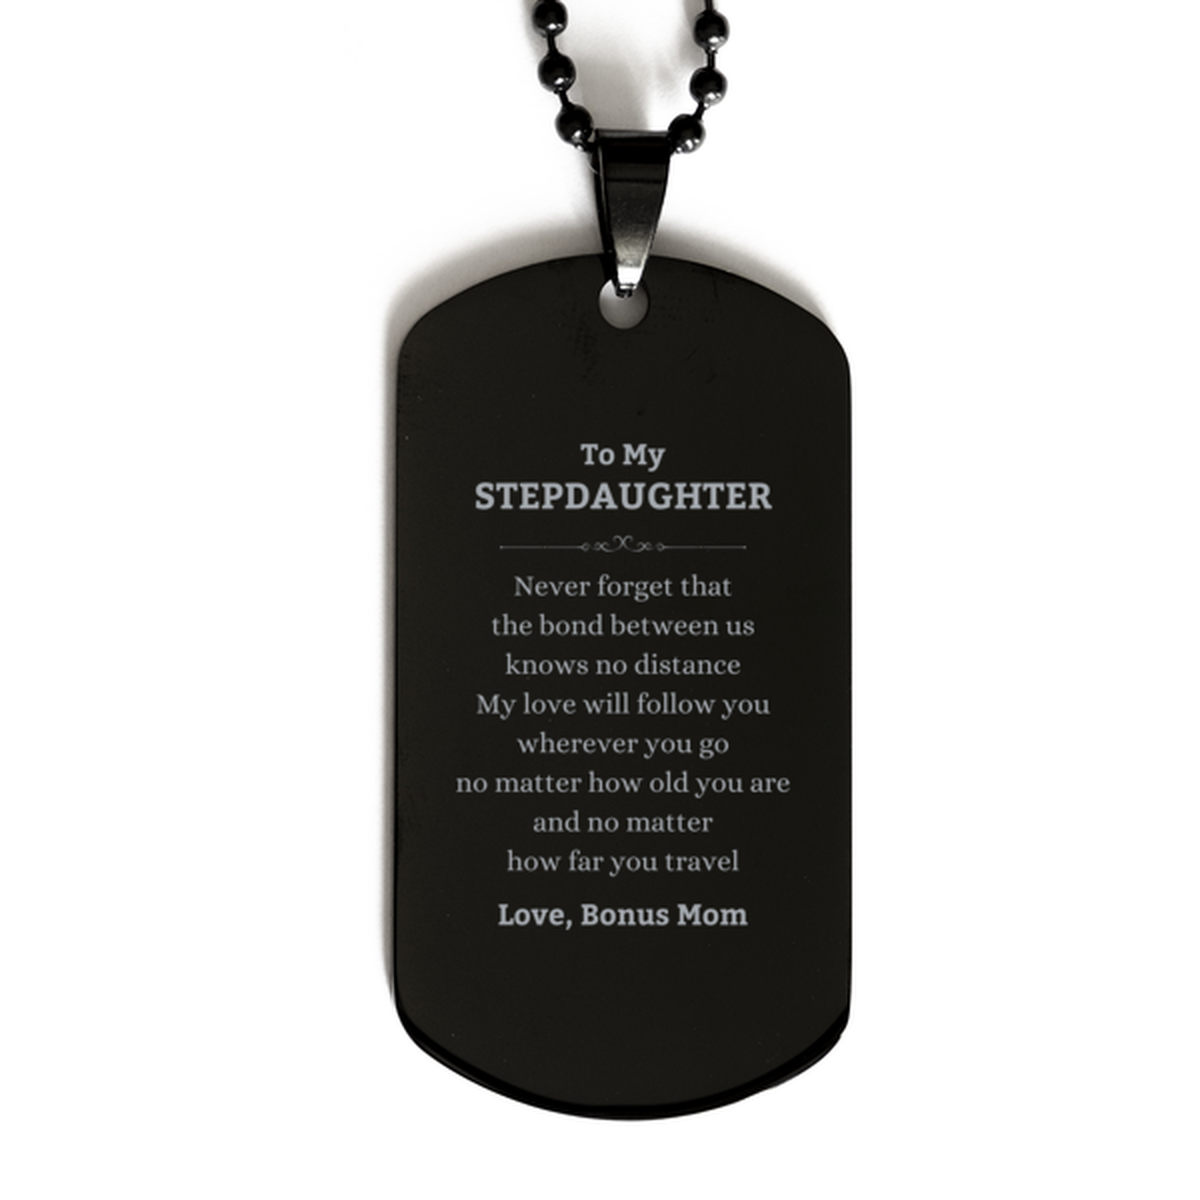 Stepdaughter Birthday Gifts from Bonus Mom, Adjustable Black Dog Tag for Stepdaughter Christmas Graduation Unique Gifts Stepdaughter Never forget that the bond between us knows no distance. Love, Bonus Mom